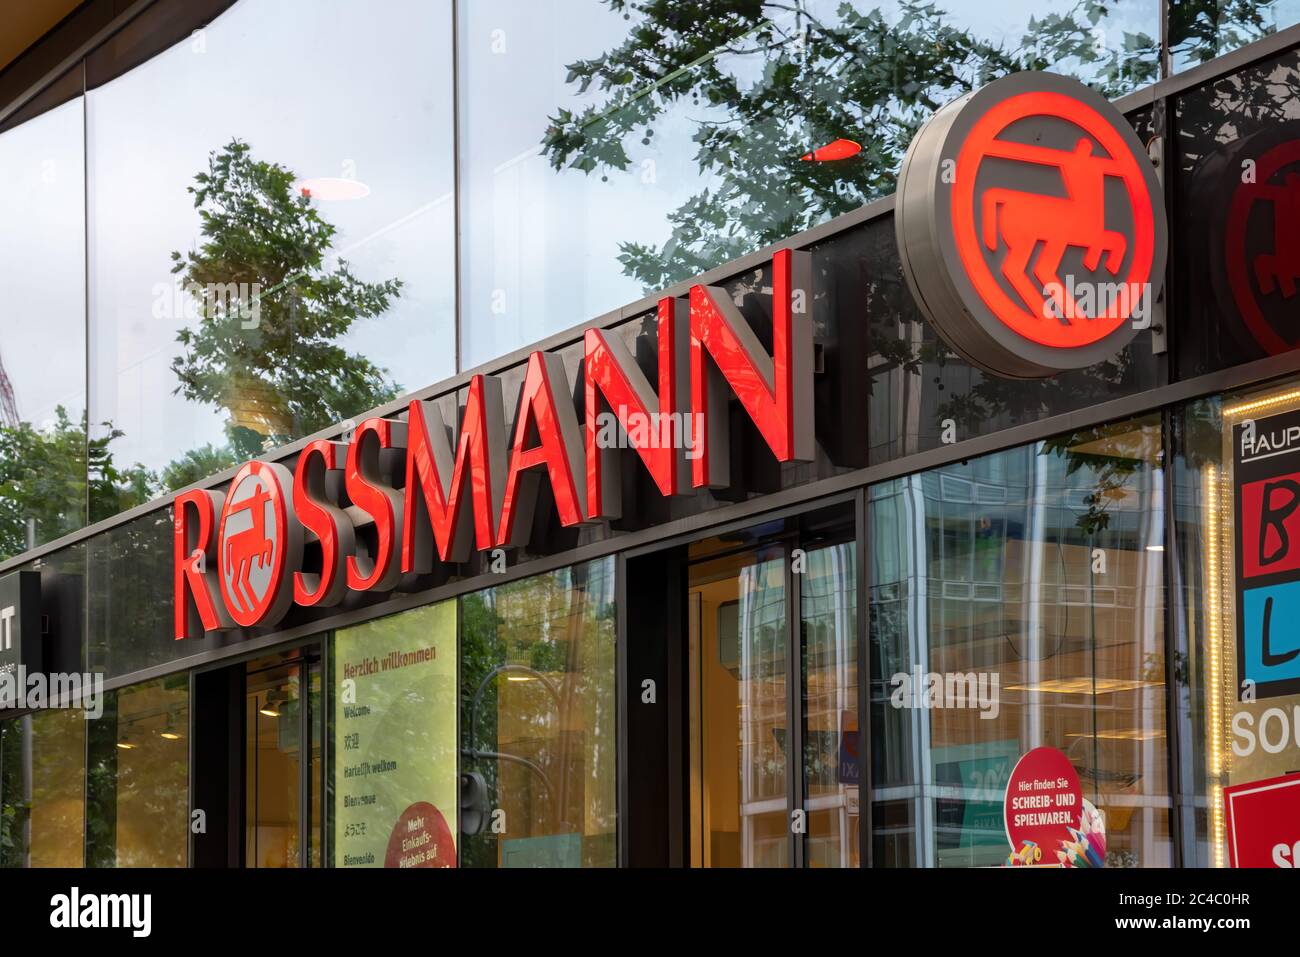 Rossmann Drugstore High Resolution Stock Photography And Images Alamy